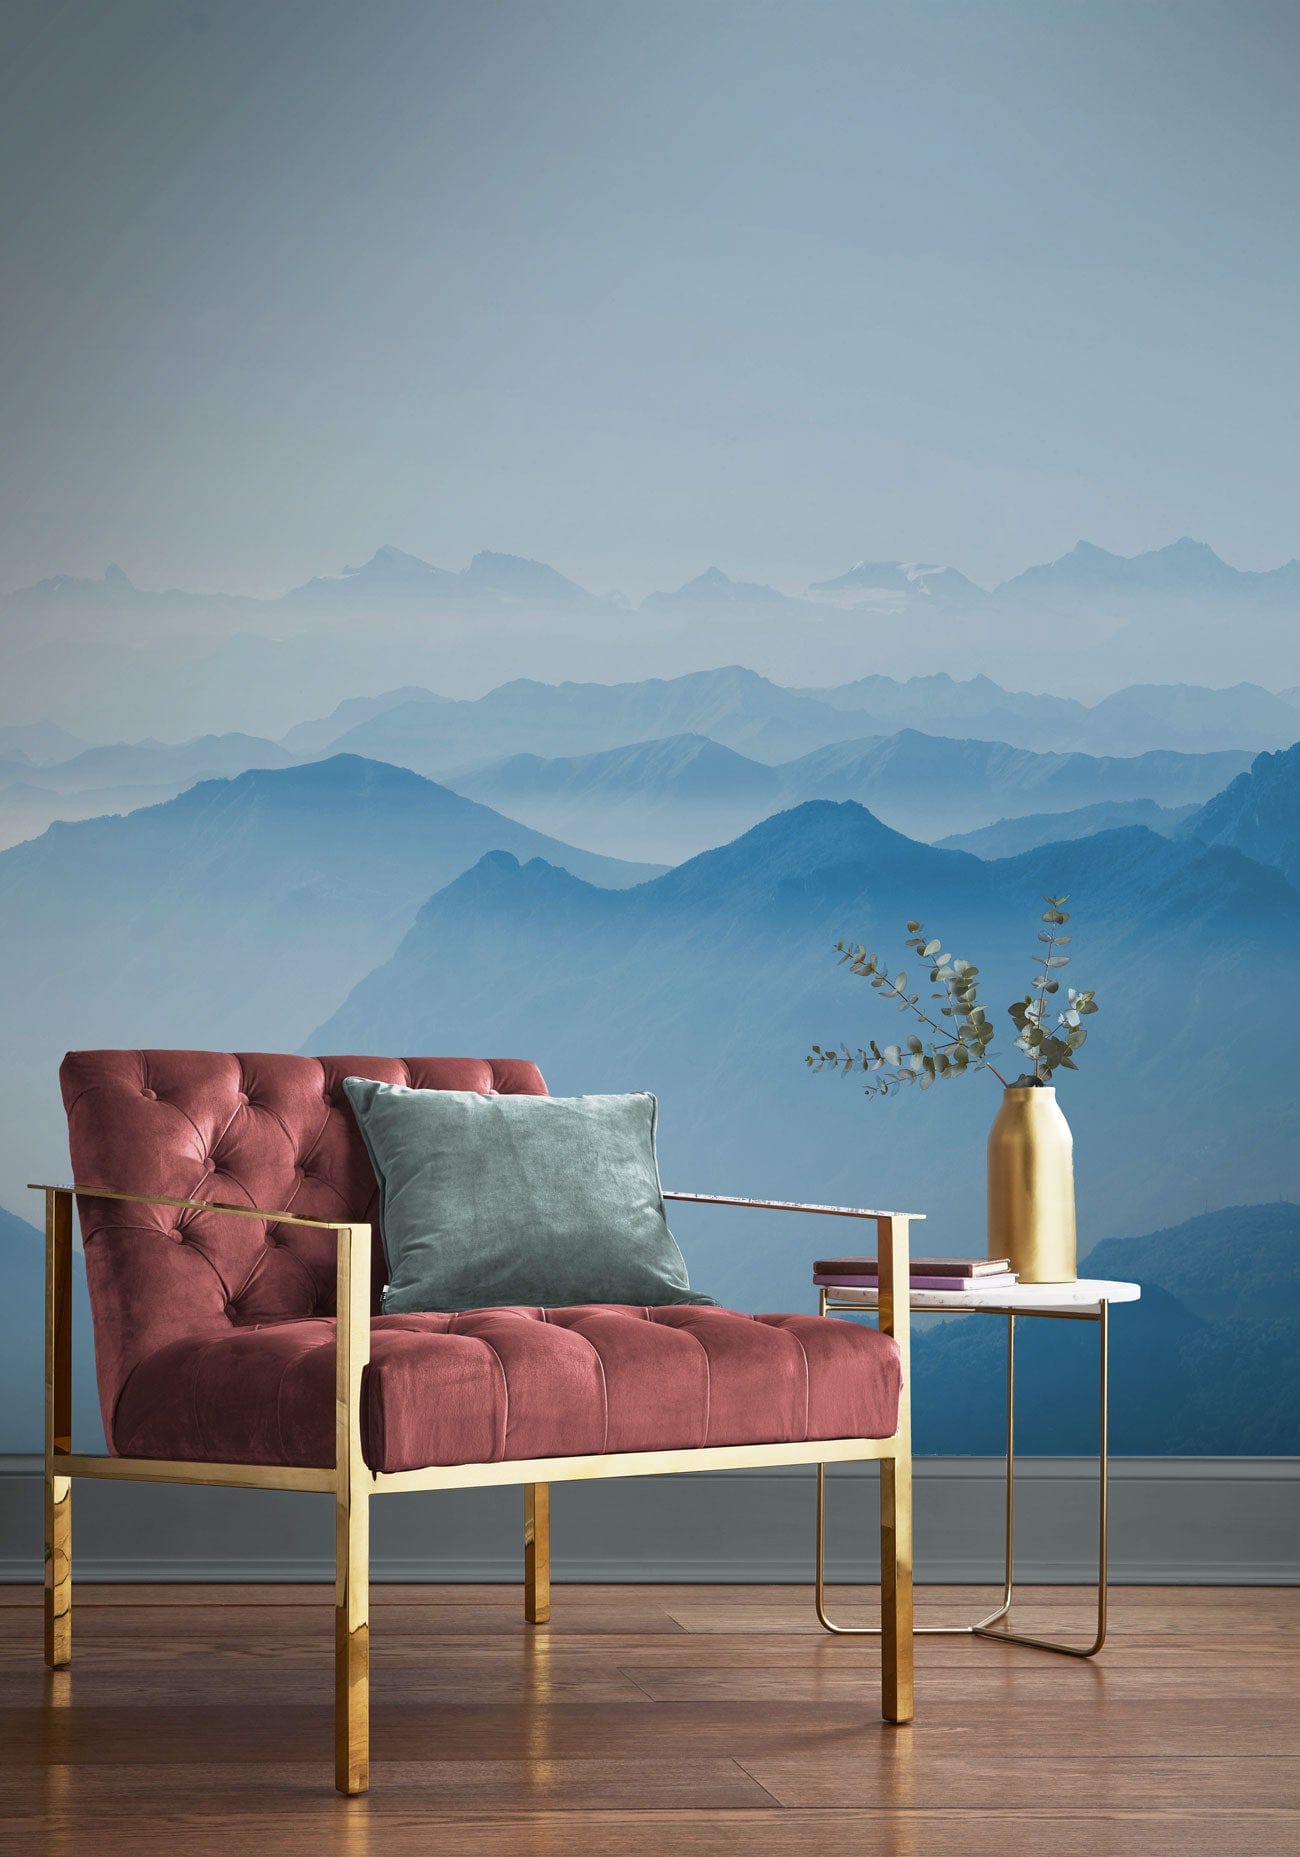 Wallpaper mural for the hallway with a scene of misty mountains in the background.